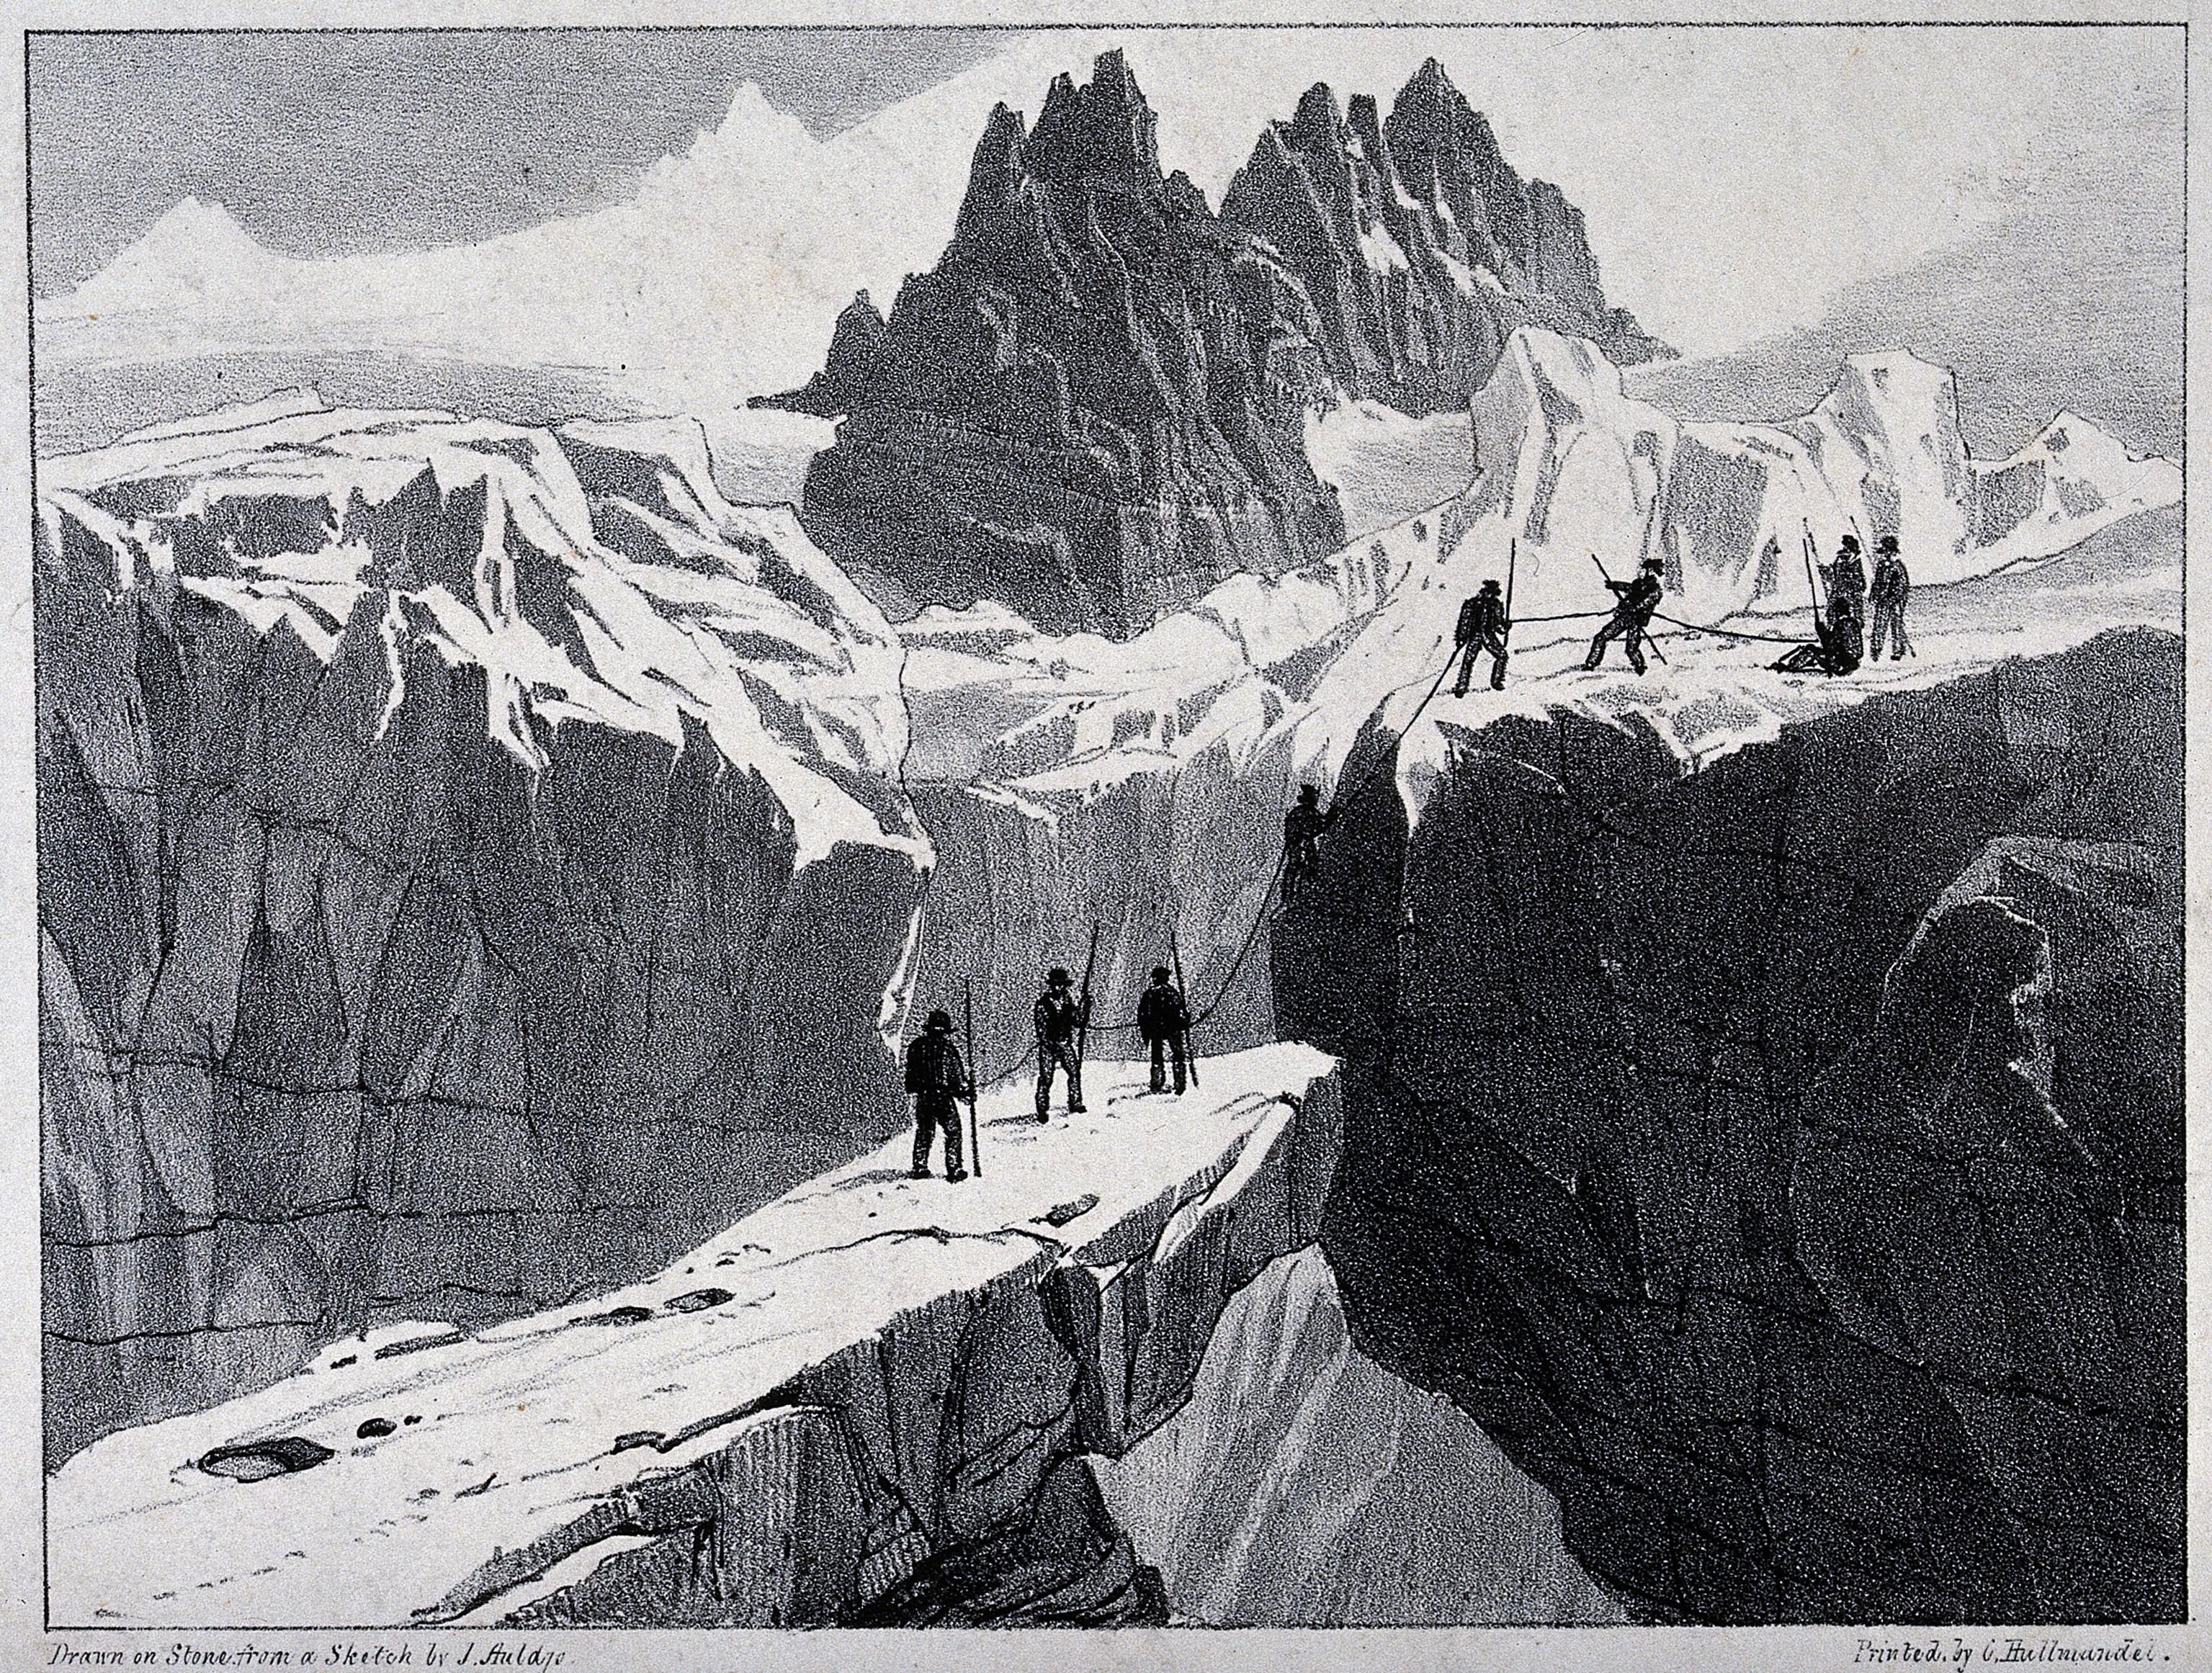 V0025171 The ascent of Mont Blanc by John Auldjo's party in 1827: mou